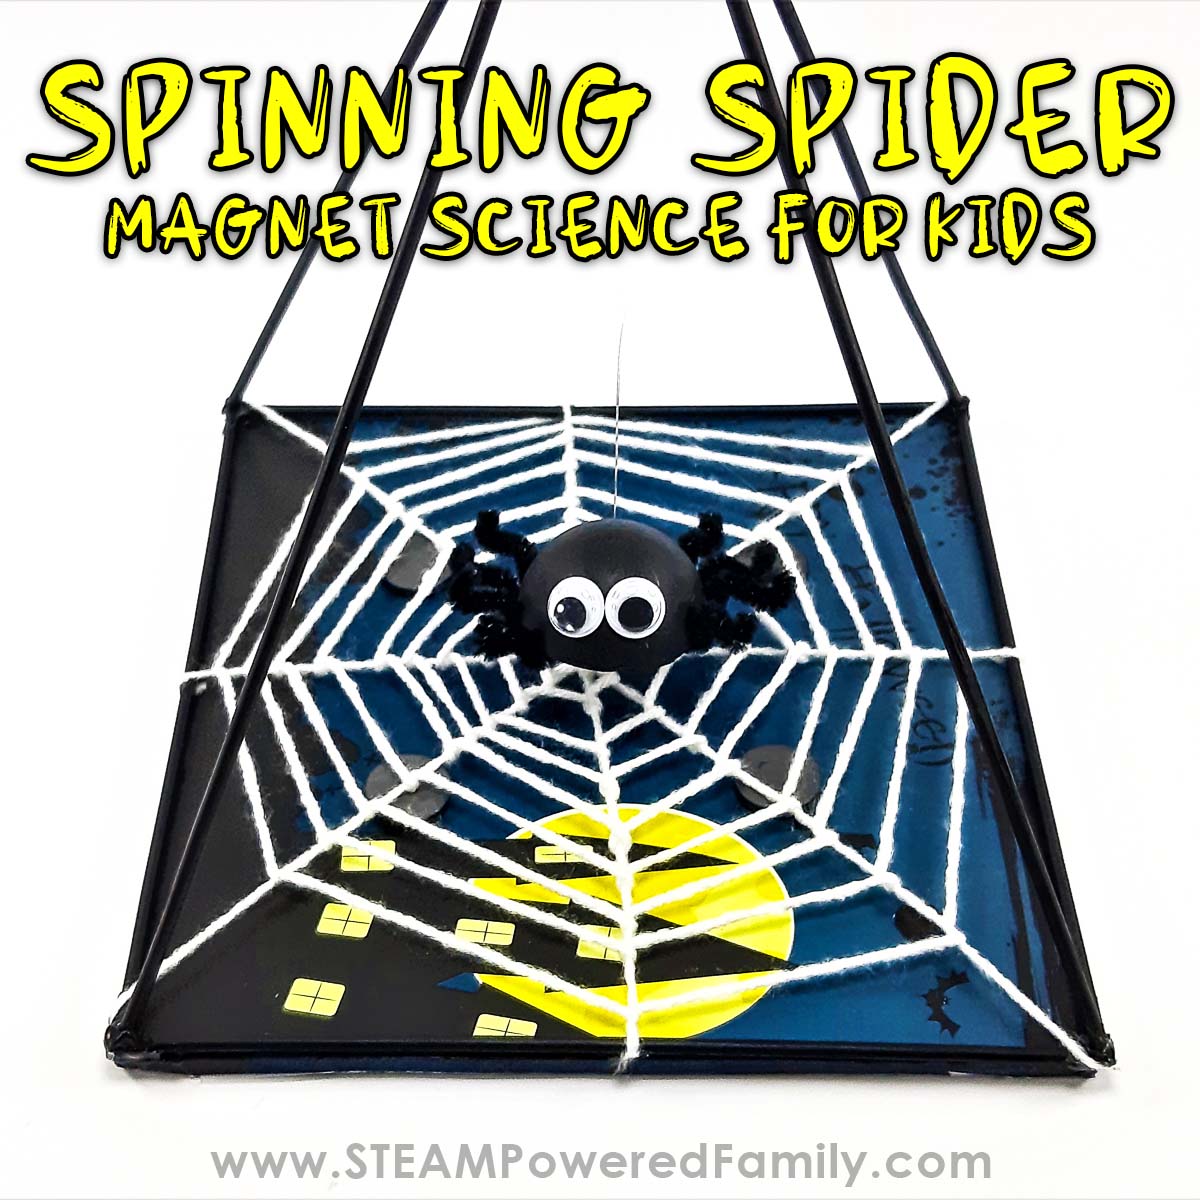 Spinning Spider – Magnetic Science